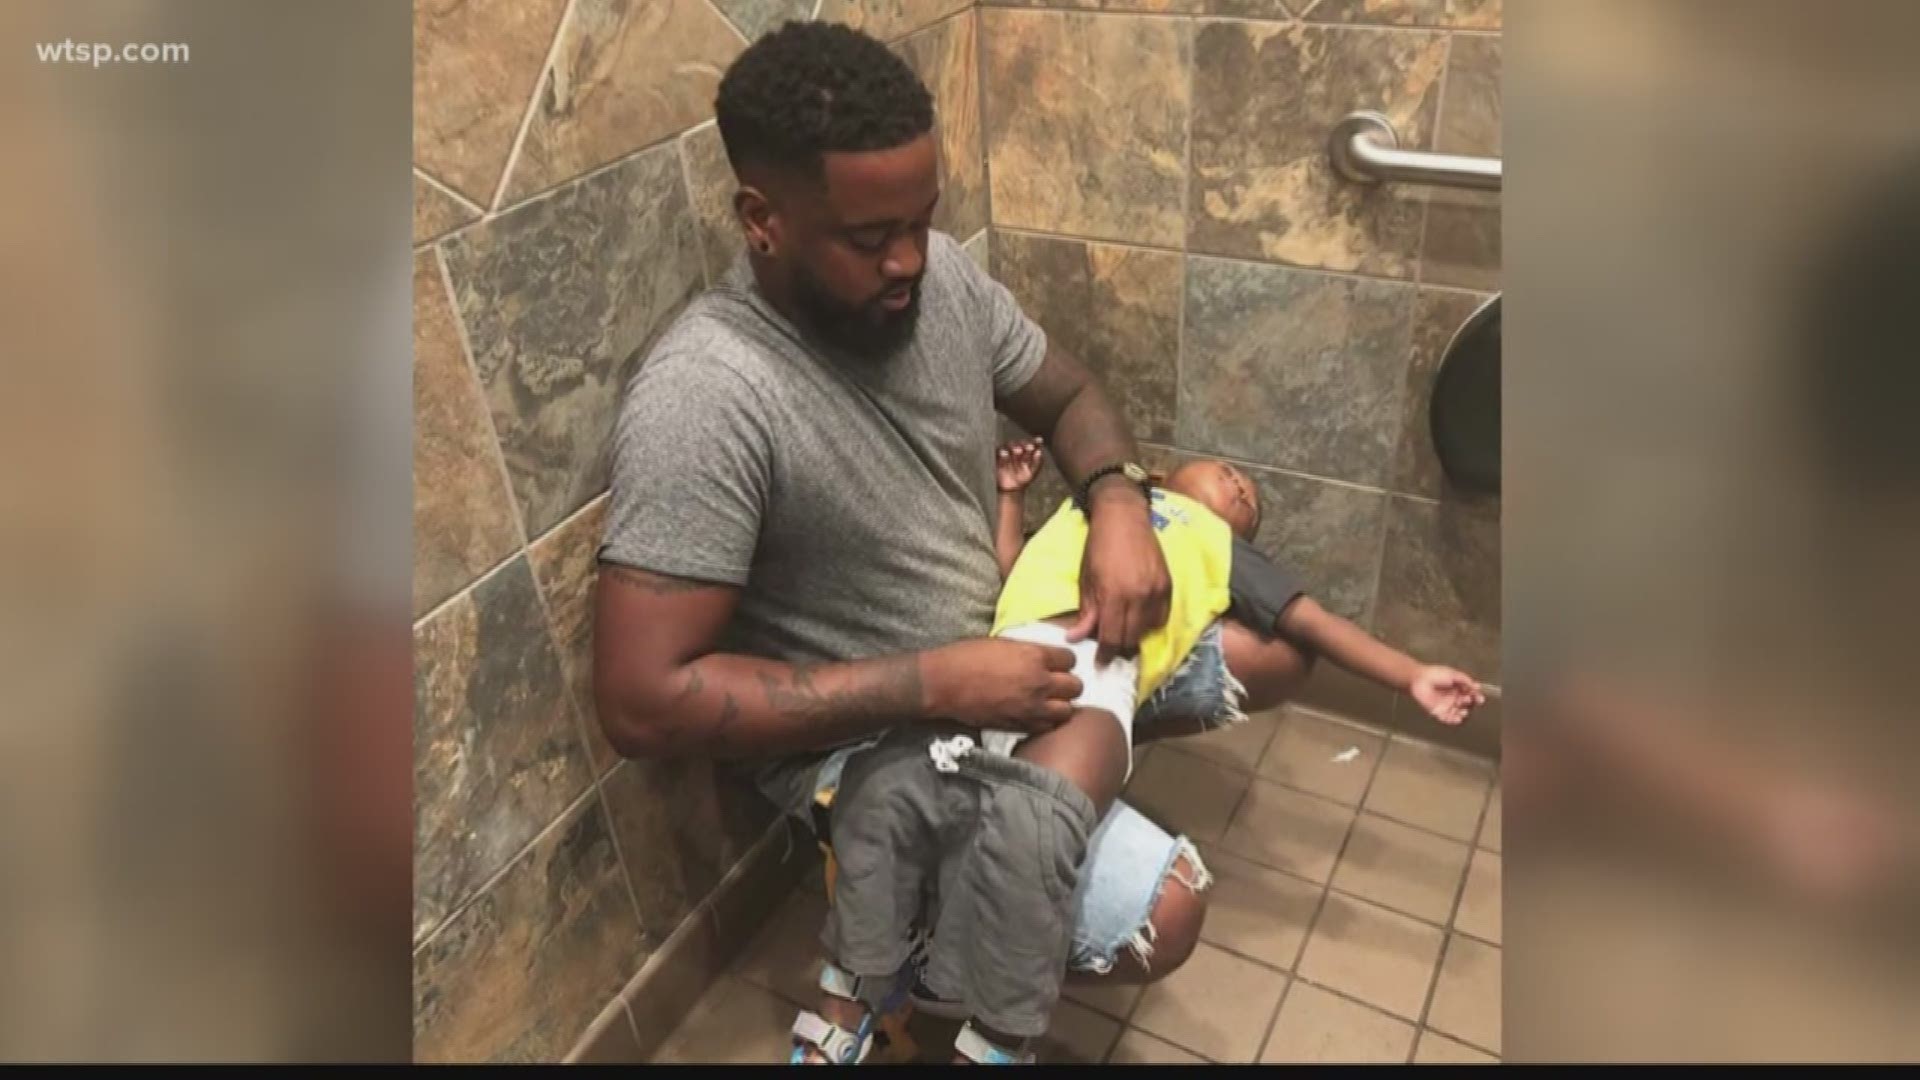 Tampa Councilman Luis Viera is hoping to bring a change to changing stations.

Viera was inspired by the Instagram hashtag #squatforchange intended to show the need for more diaper changing stations in male restrooms. Dads have been posting photos of themselves in a predicament -- changing their children's diapers in a squat position. The hashtag has inspired a movement.